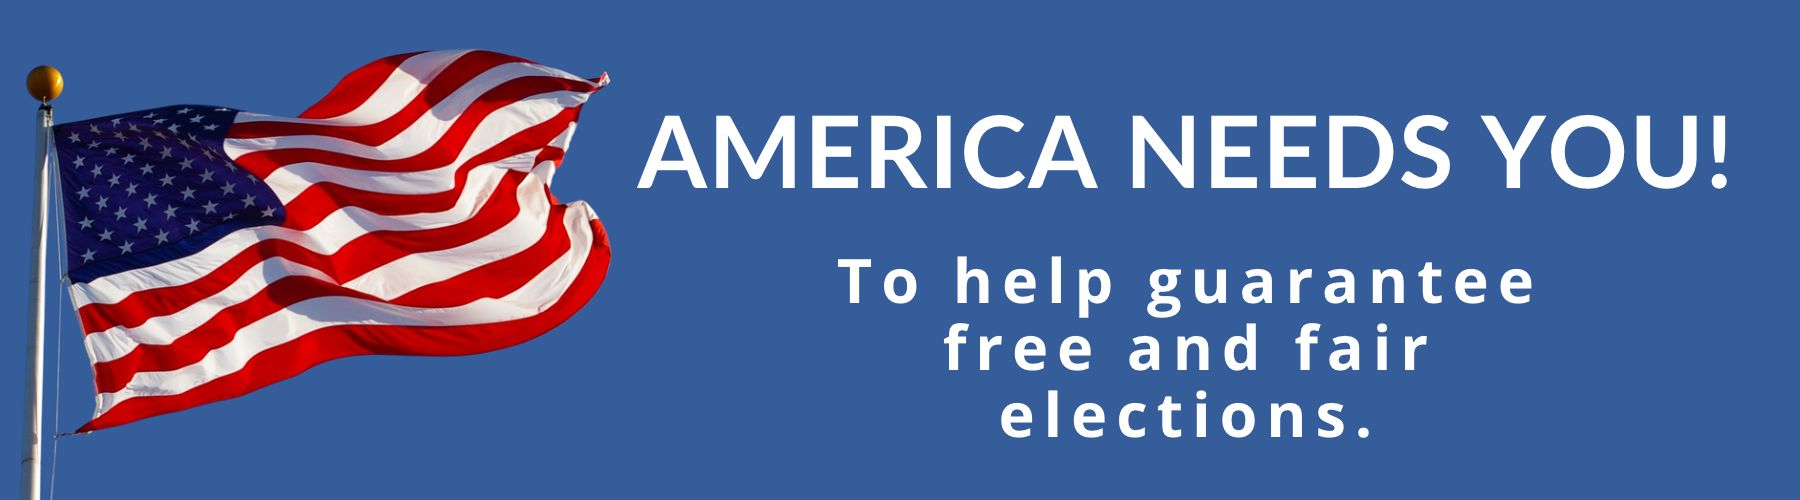 America needs you to guarantee free and fair elections